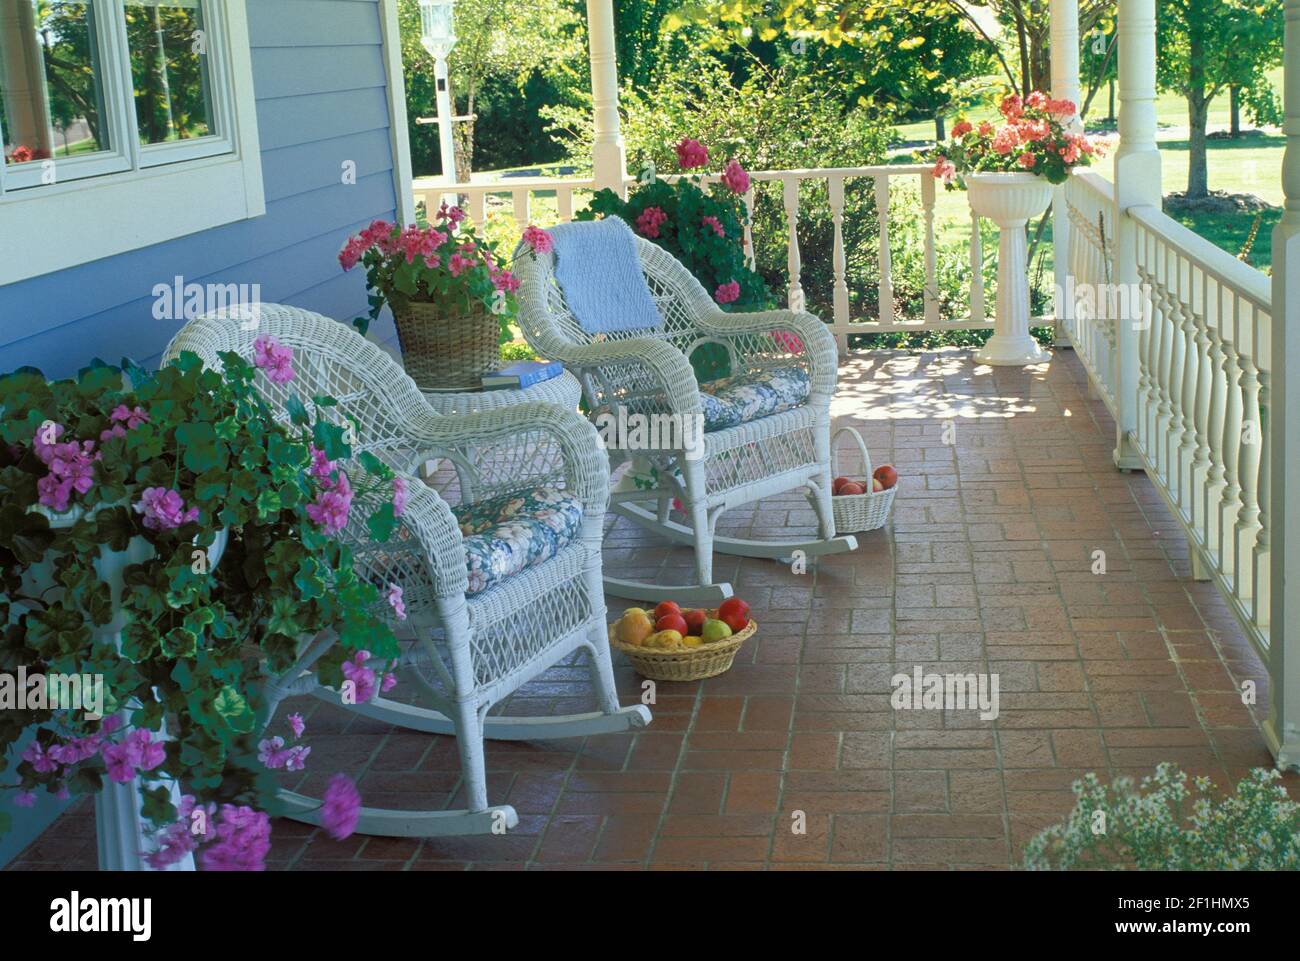 Wicker rocking chairs on a brick patio front porch with blooming potted flowers - a private place, Missouri, USA Stock Photo